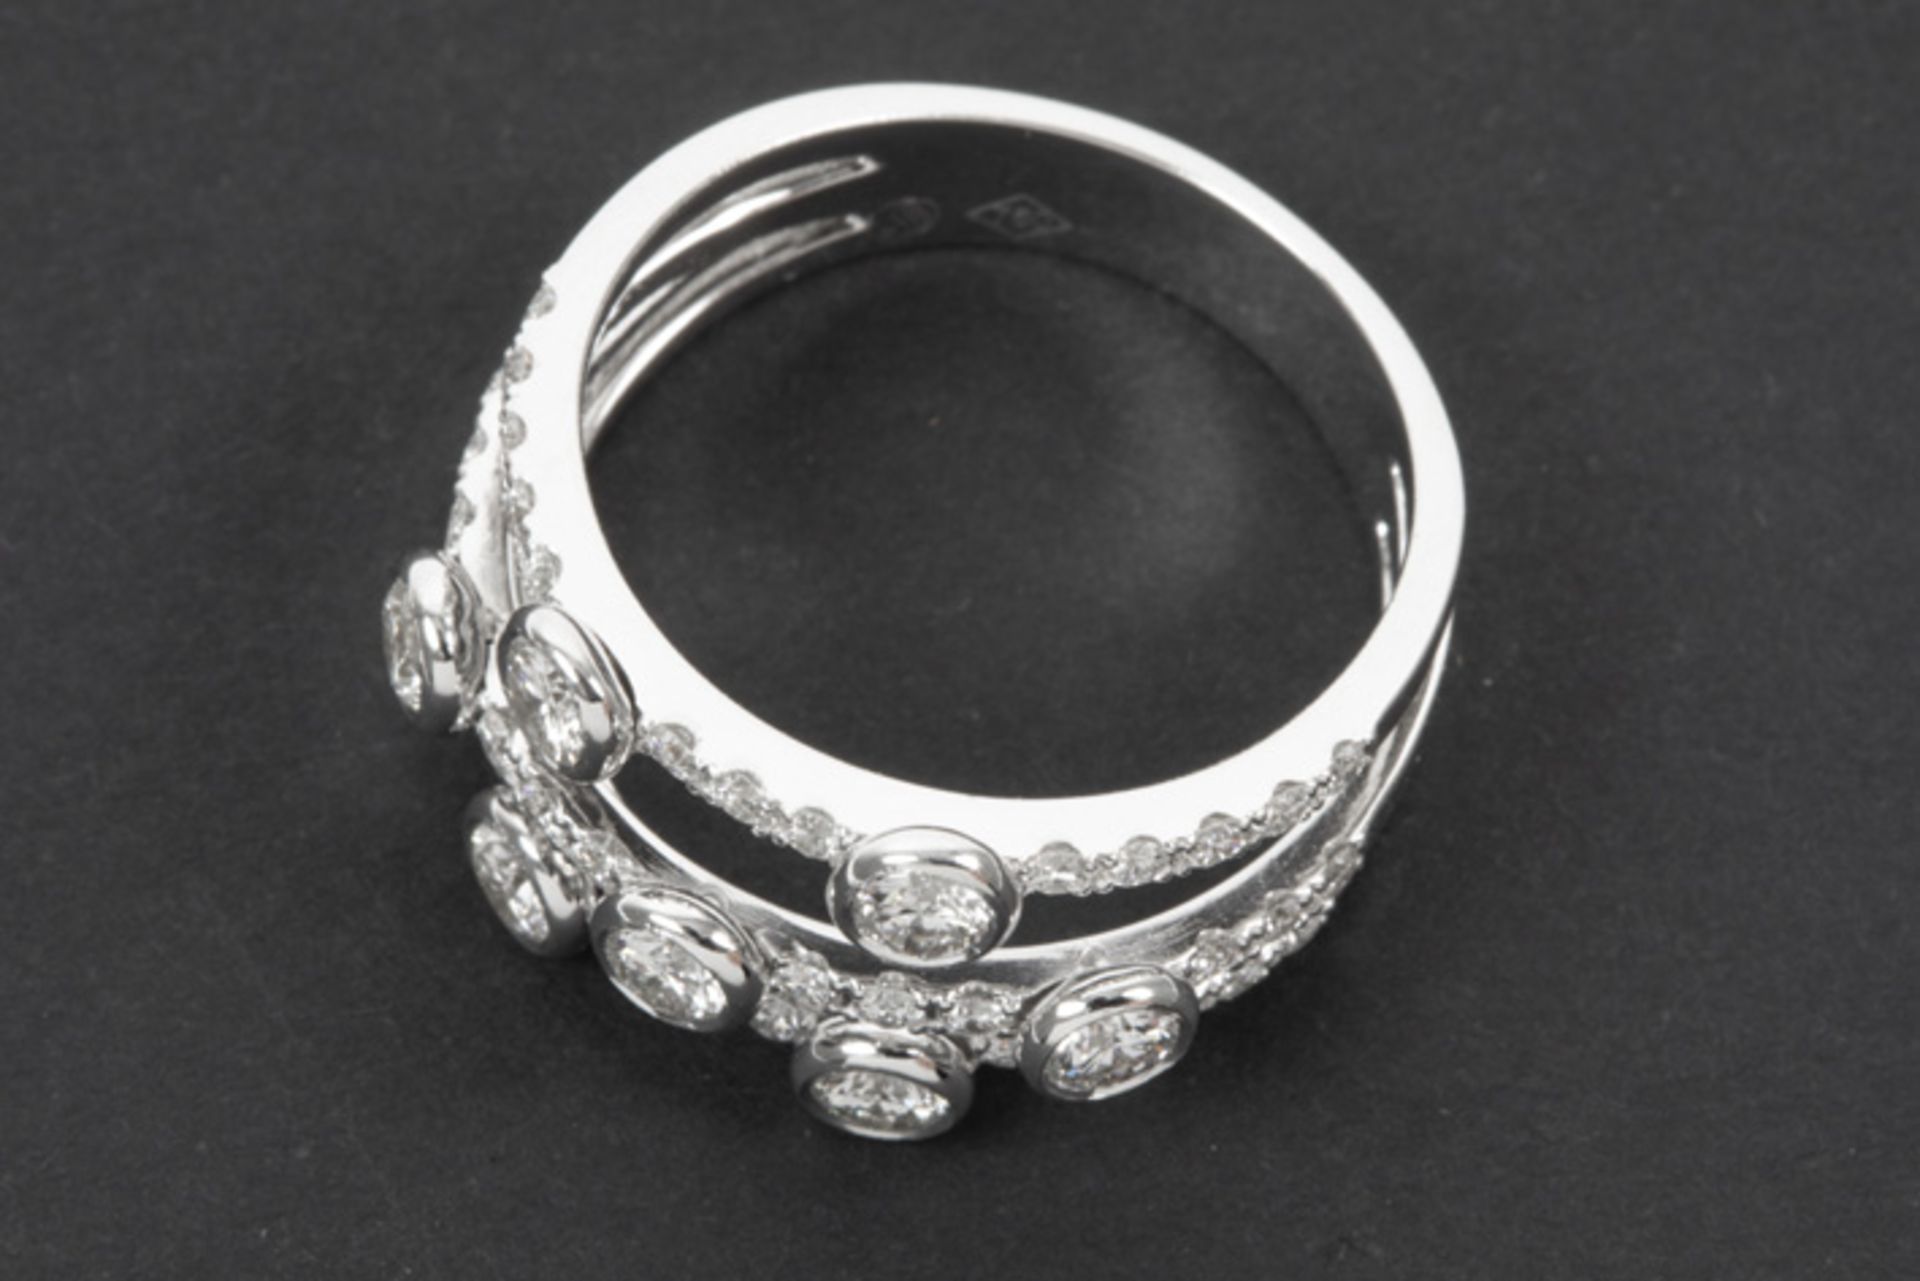 modern design ring in white gold (18 carat) with at least 1,20 carat of high quality brilliant cut - Image 2 of 2